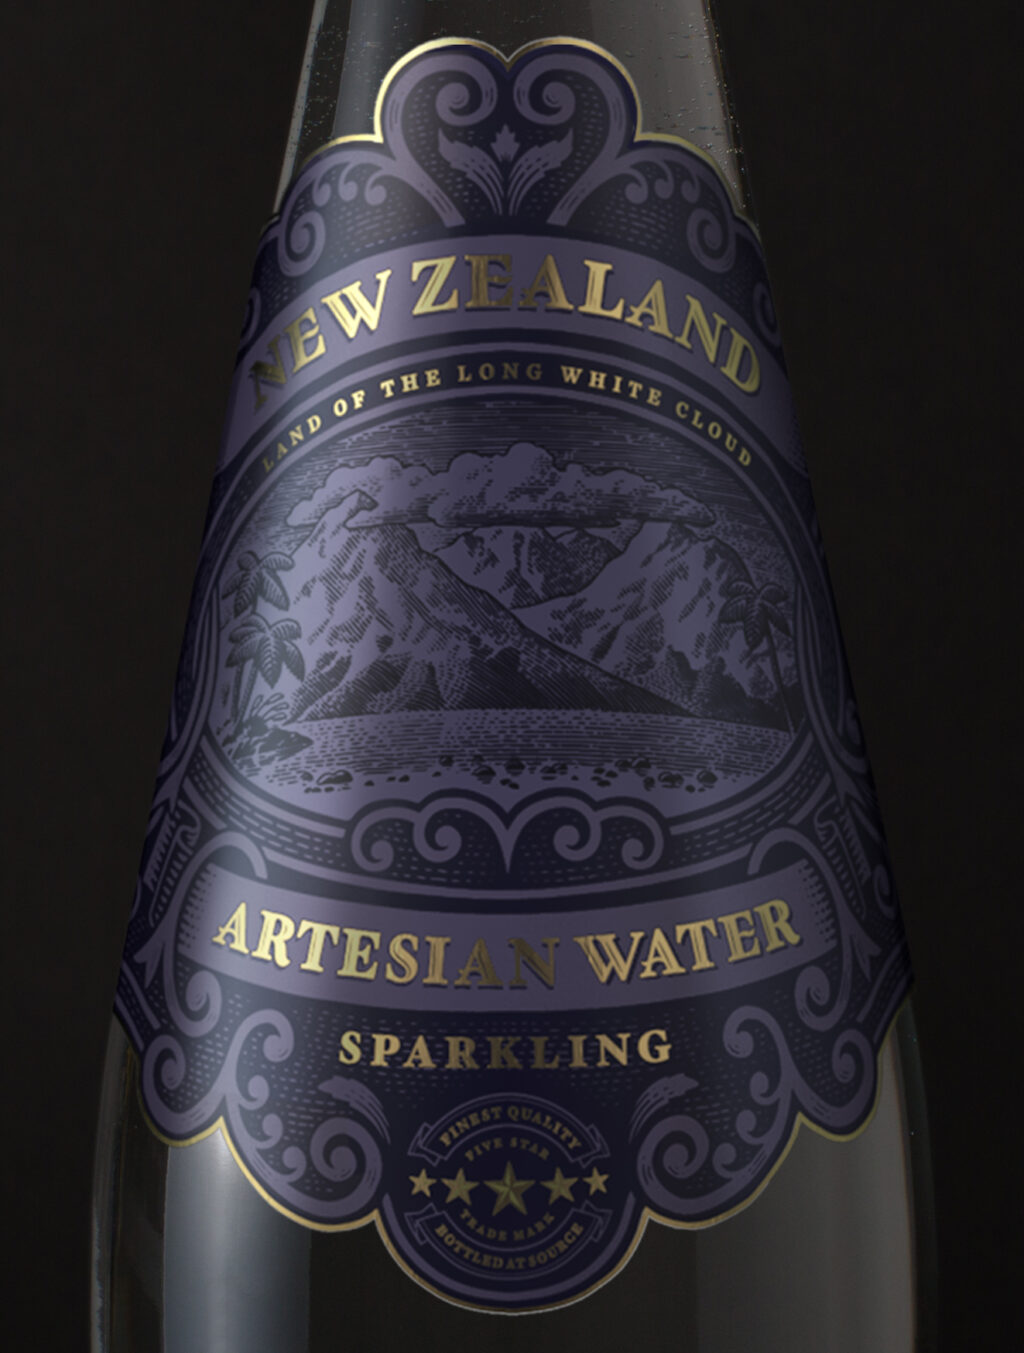 New Zealand Spring Water